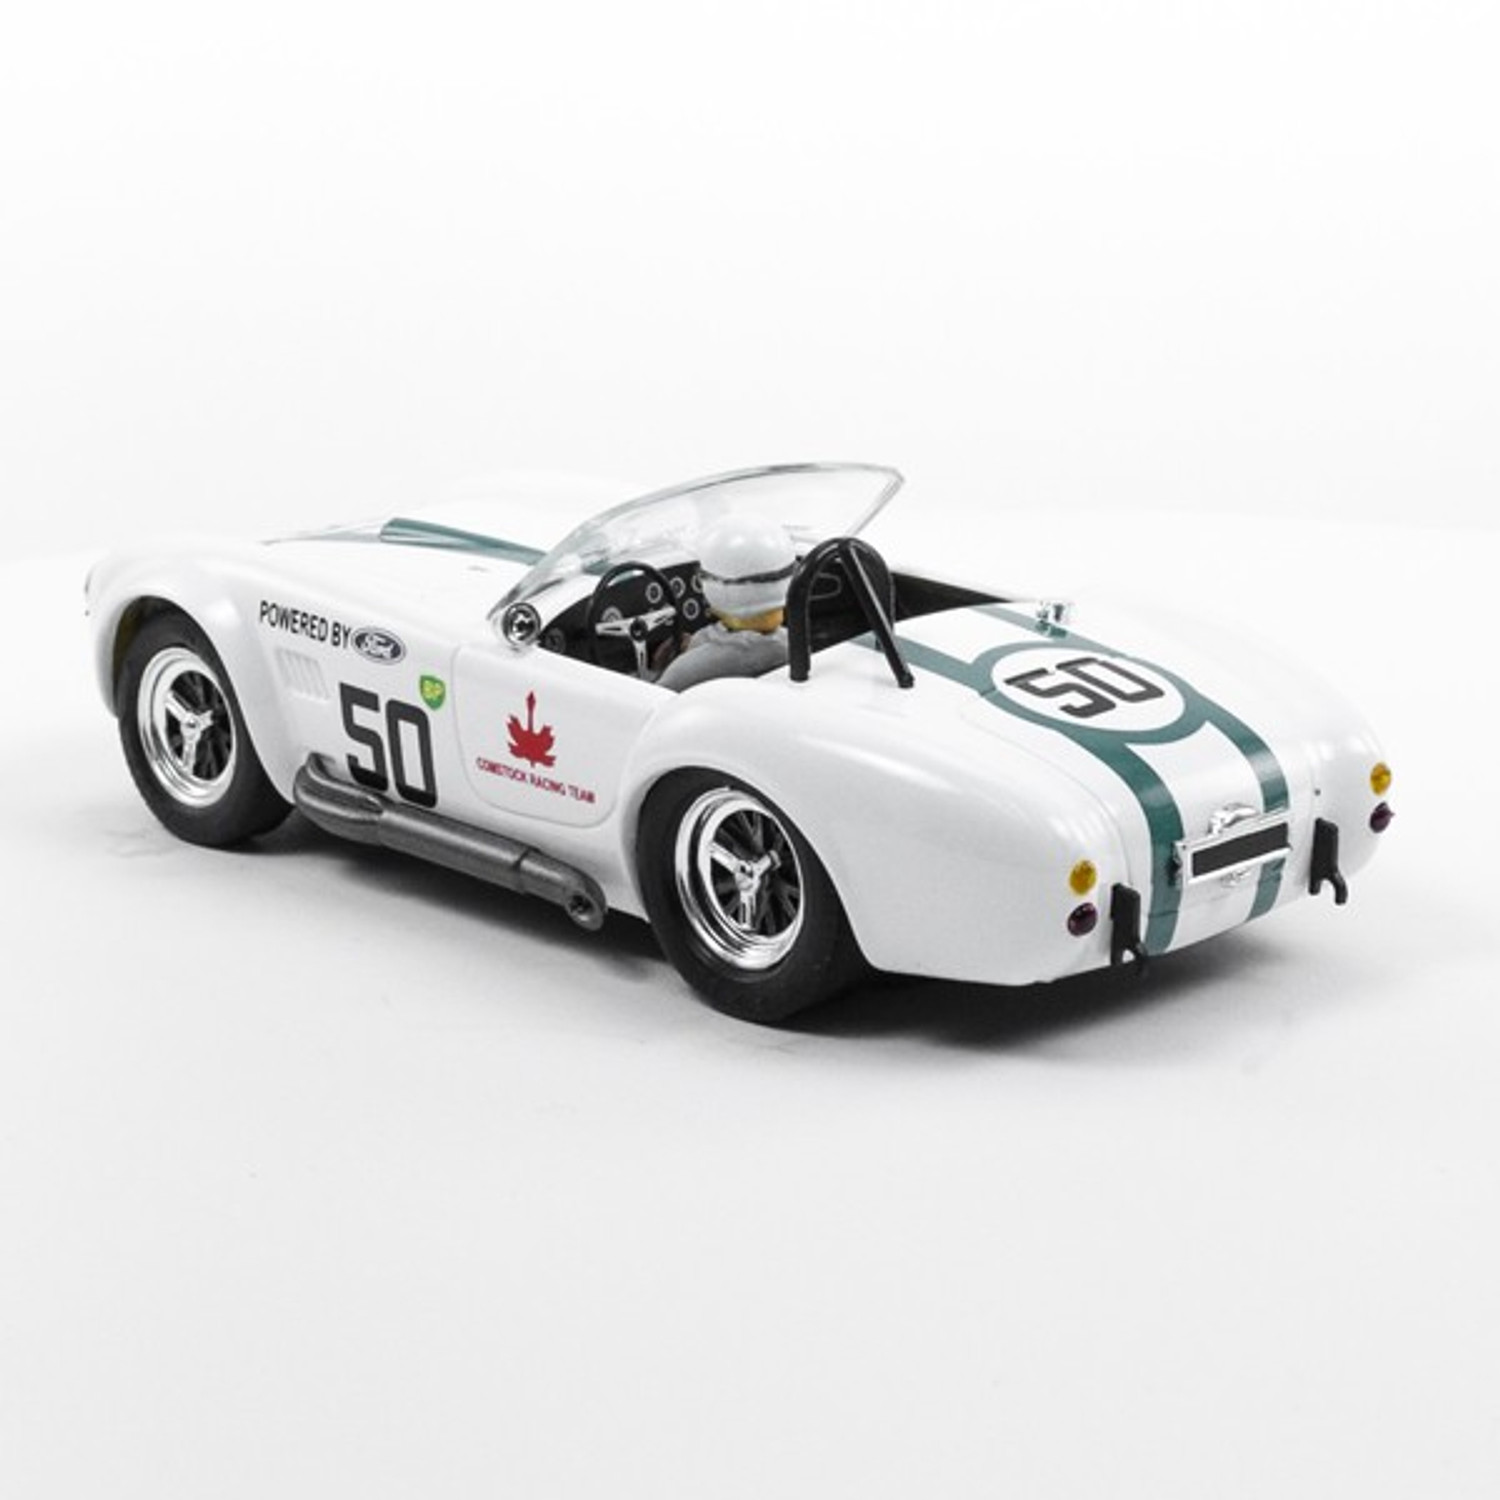 Stock Number: 16212 - White Green Stripe Number 50 Car by Unknown